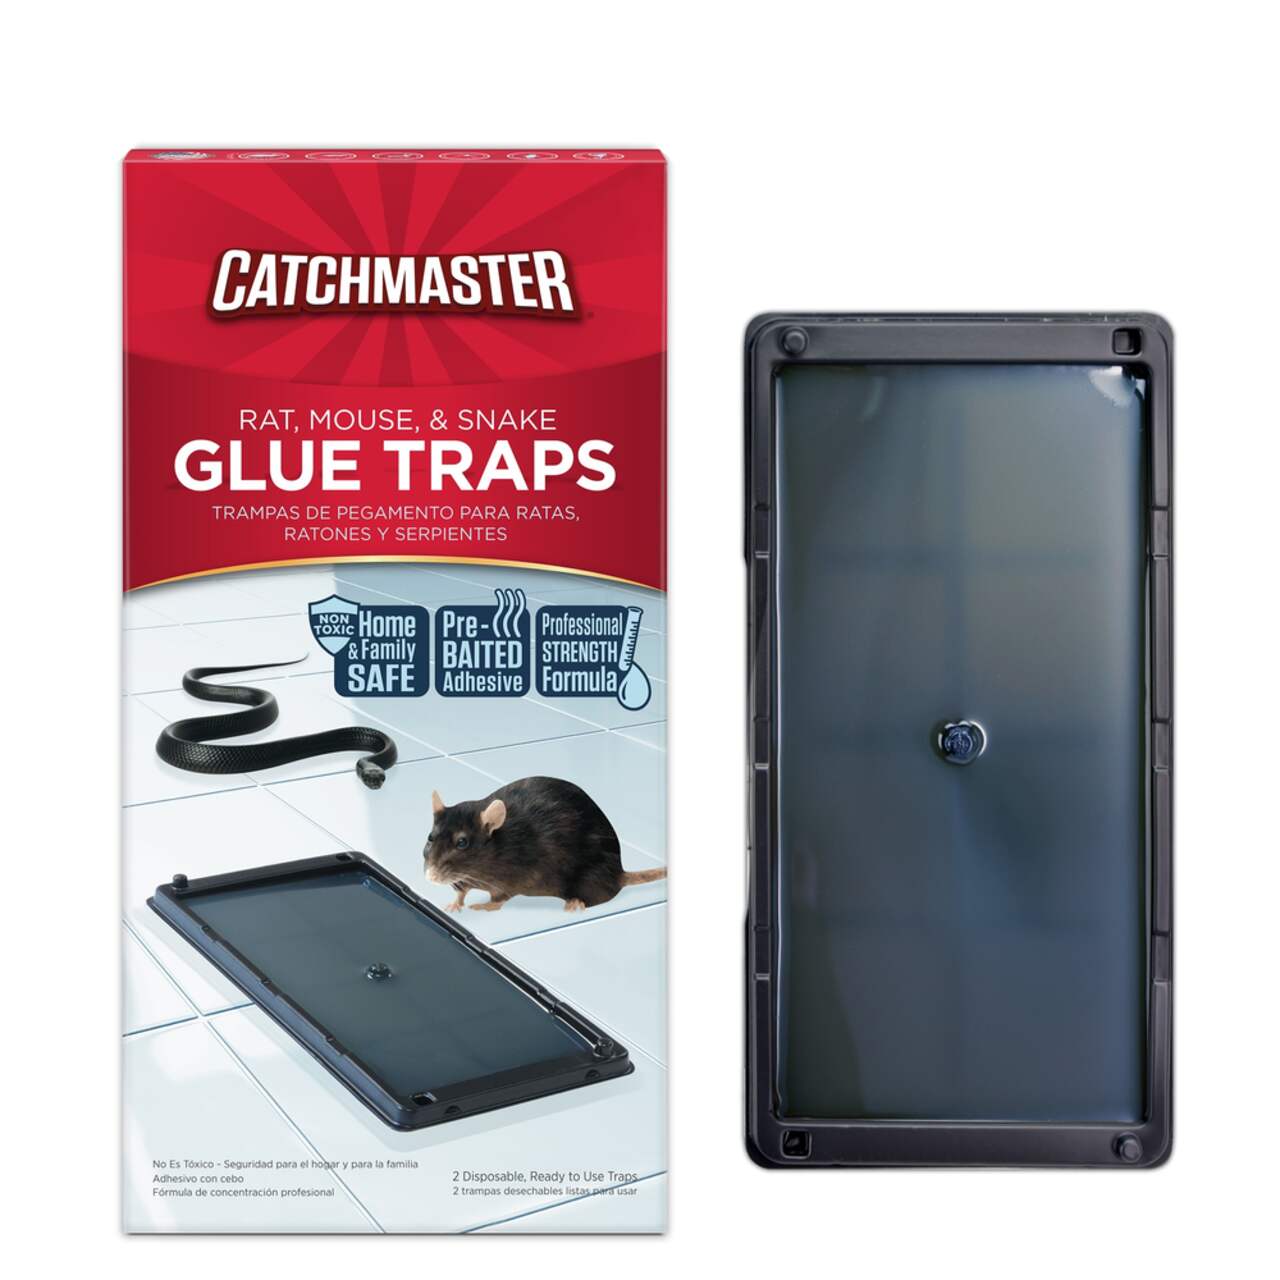 https://media-www.canadiantire.ca/product/seasonal-gardening/gardening/weed-insect-rodent-control/0593781/catchmaster-rat-mouse-glue-trap-2pk-f5e0bbc3-0219-4807-b397-9fc50749ba4d.png?imdensity=1&imwidth=640&impolicy=mZoom